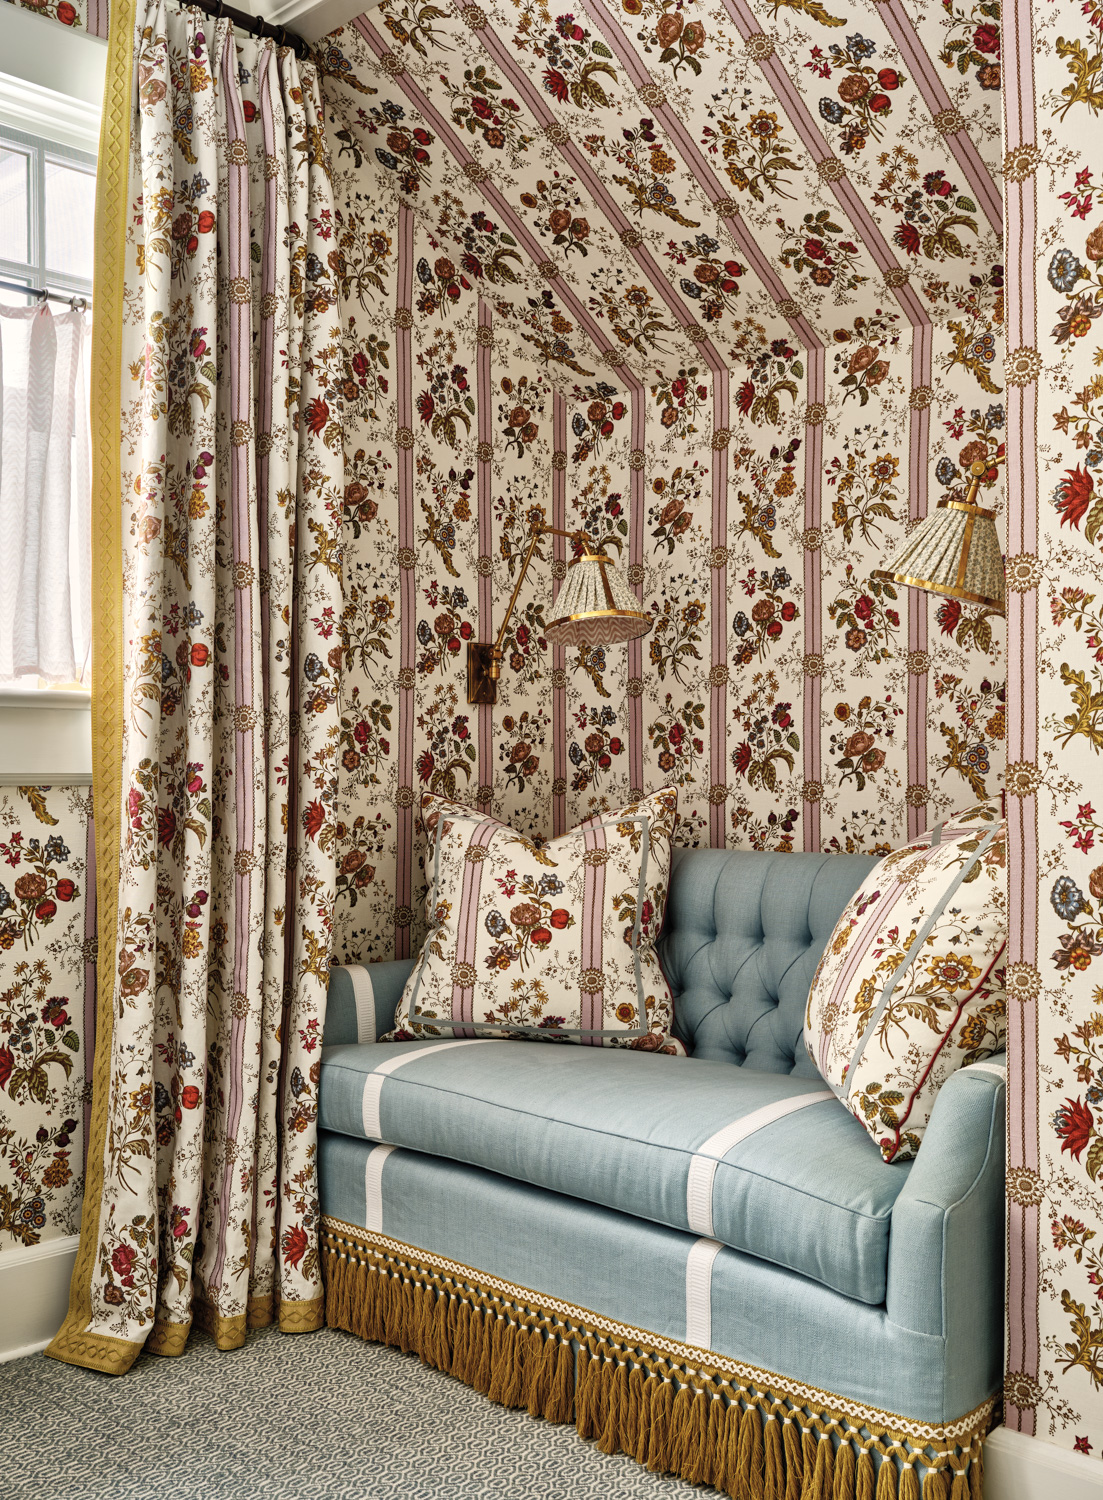 Nook with settee and floral...